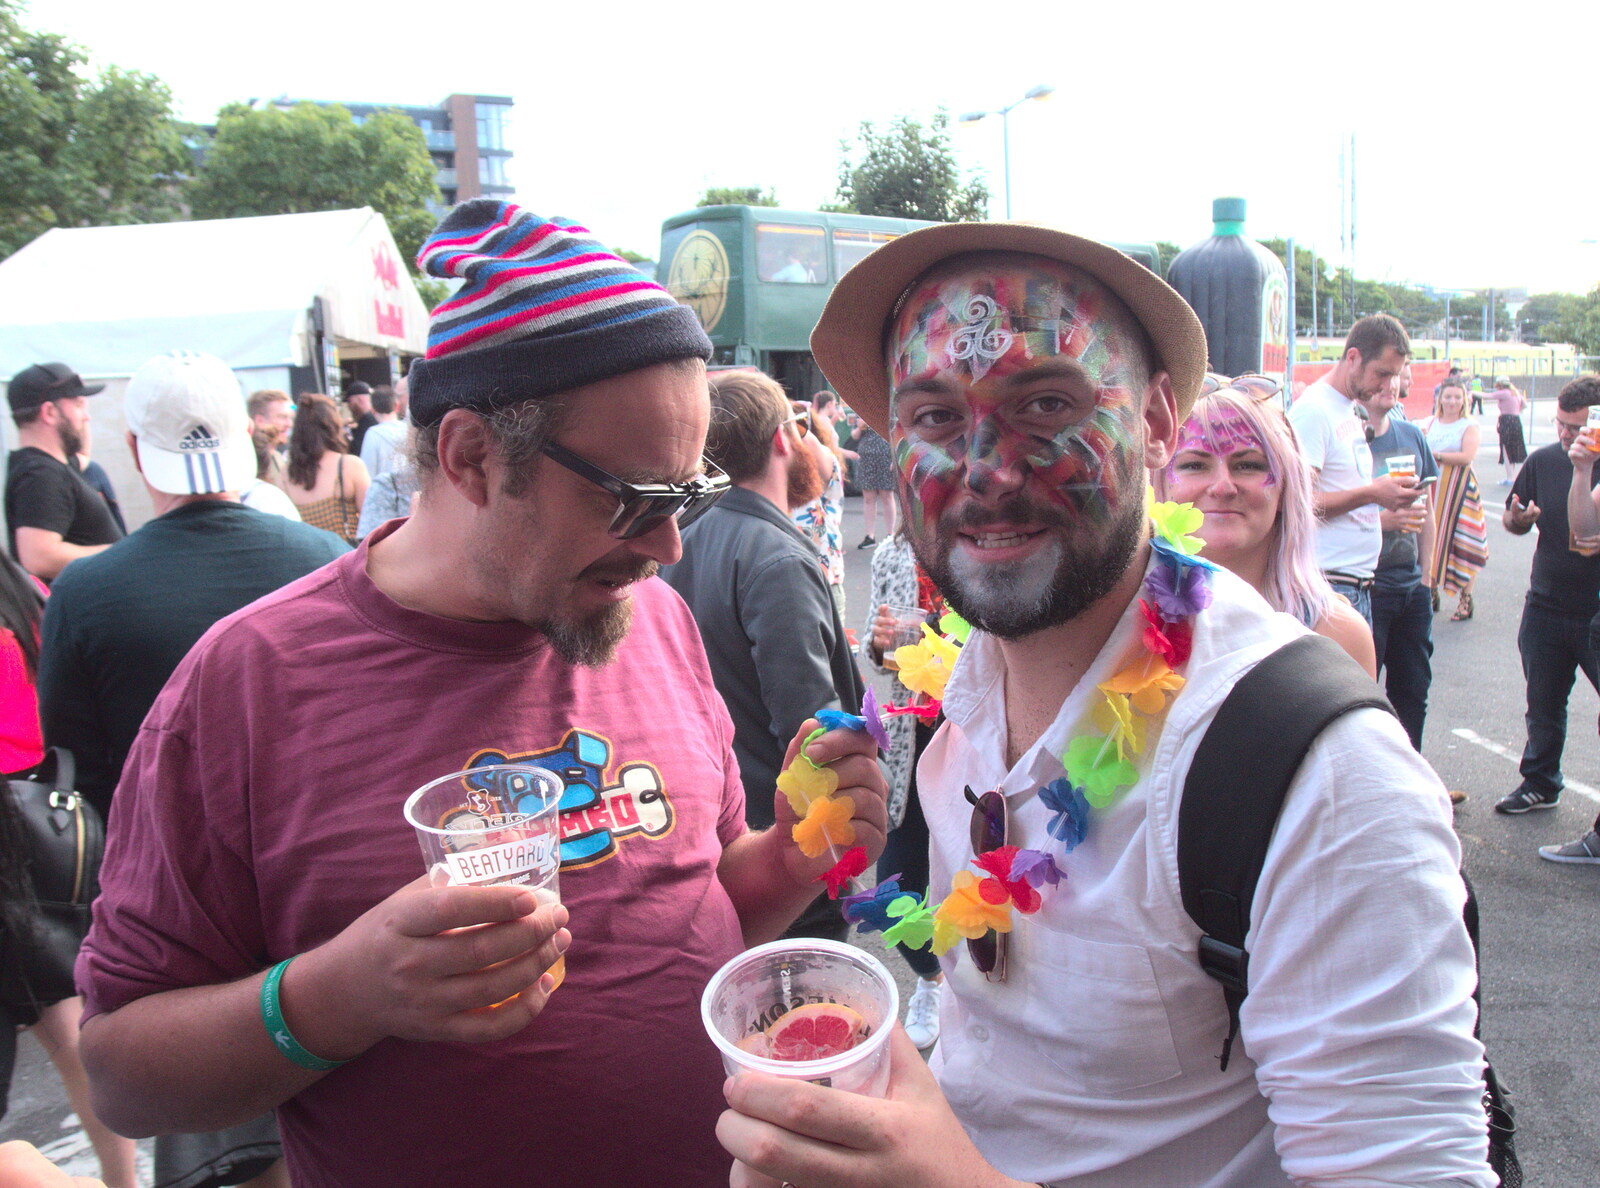 Noddy and a geezer with face paint from Beatyard Festival, Dún Laoghaire, County Dublin, Ireland - 5th August 2018